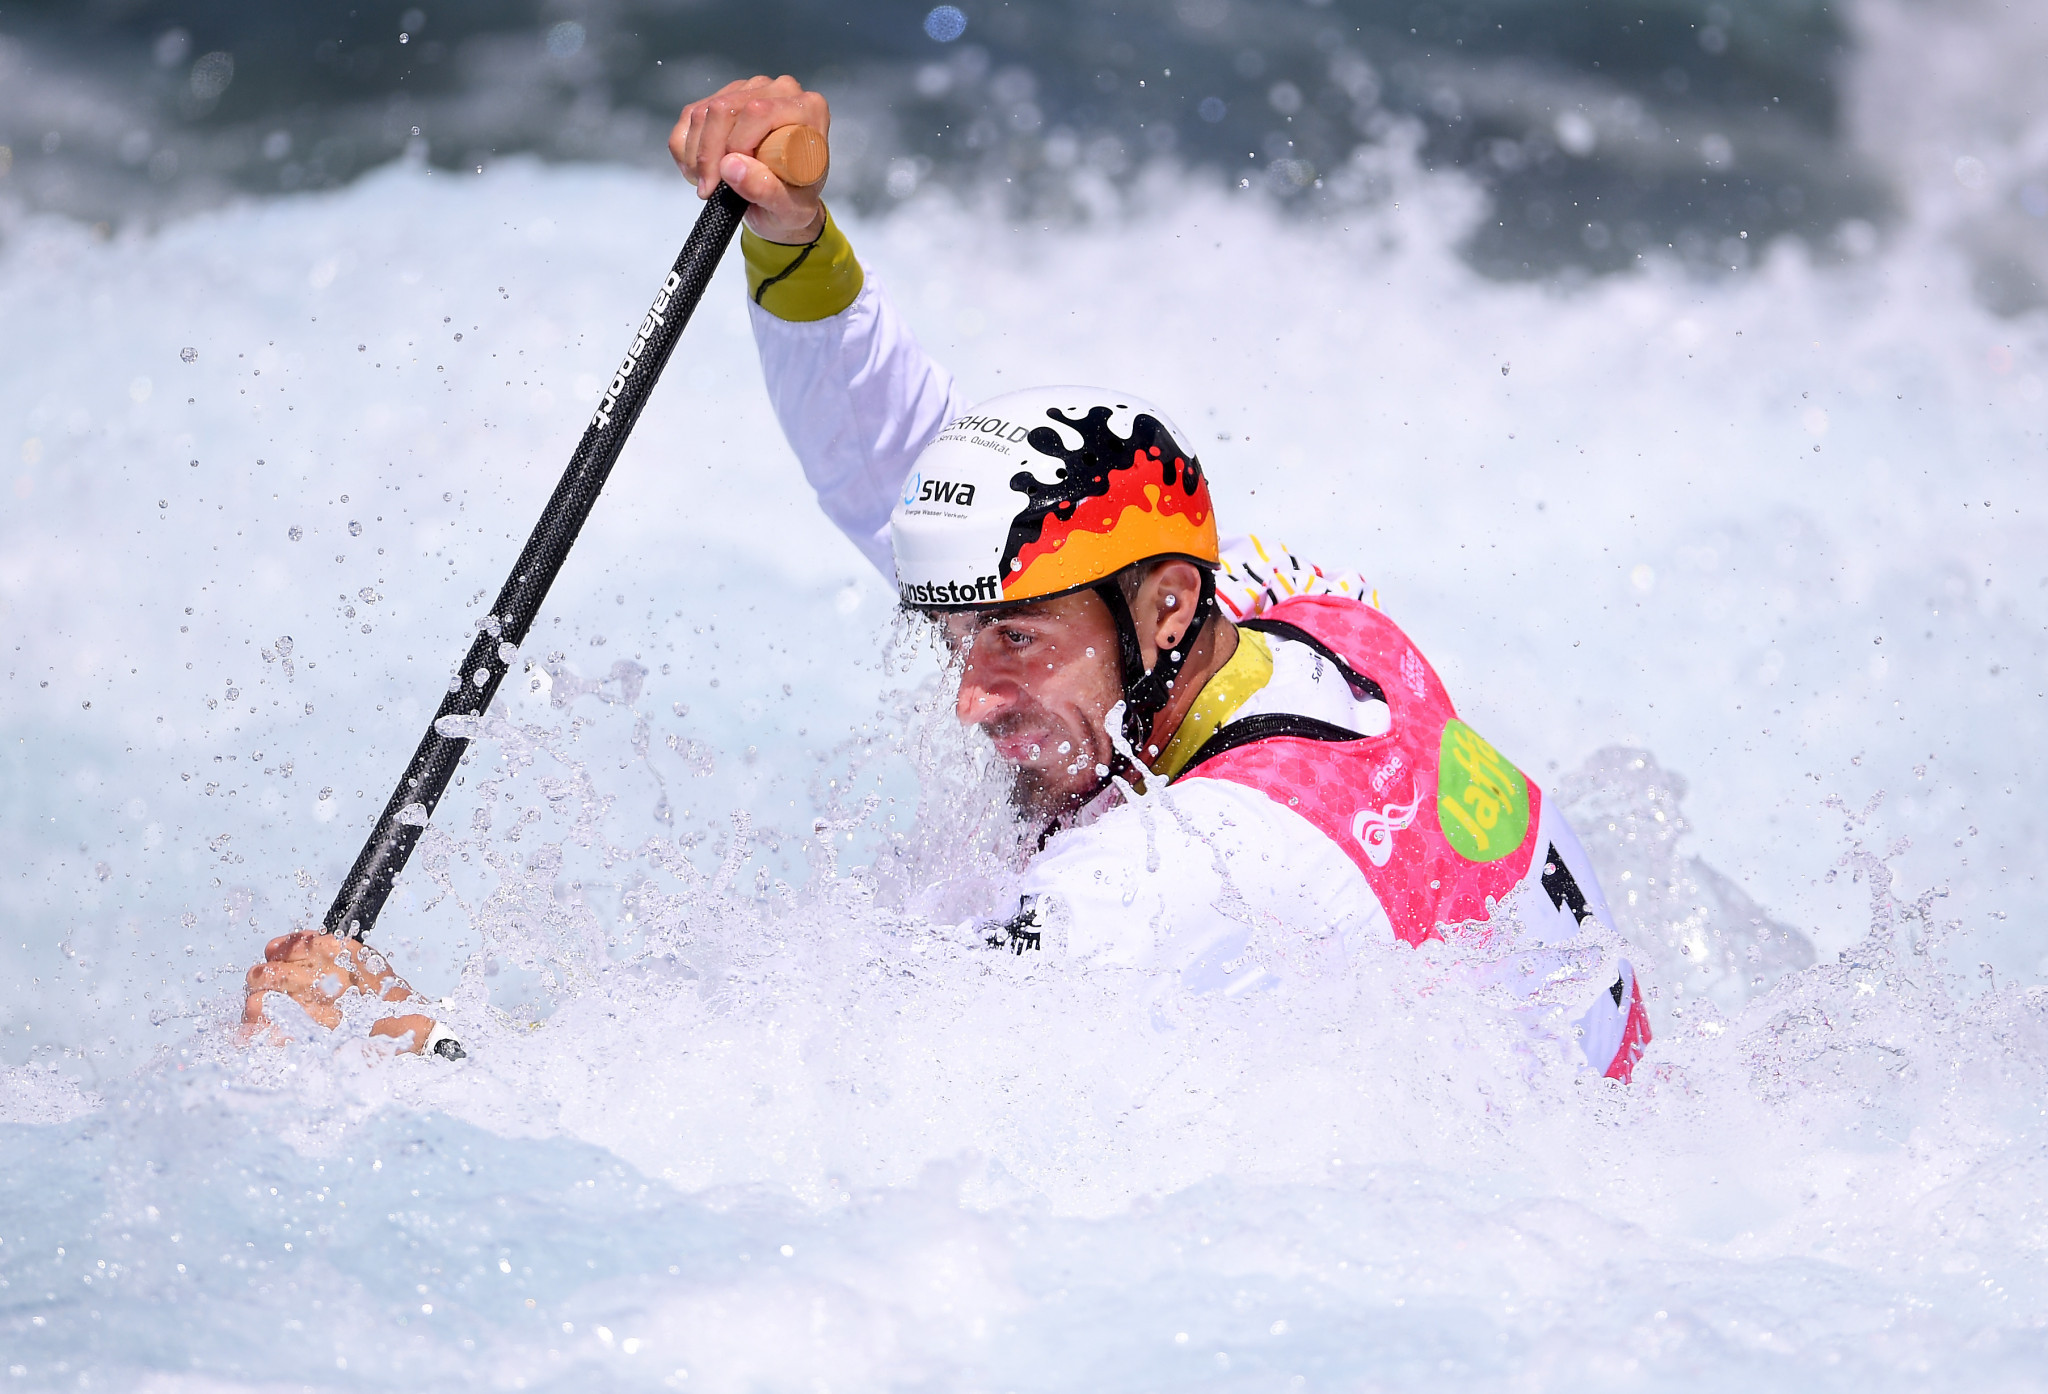 Germany's Franz Anton won the men's C1 event ©Getty Images